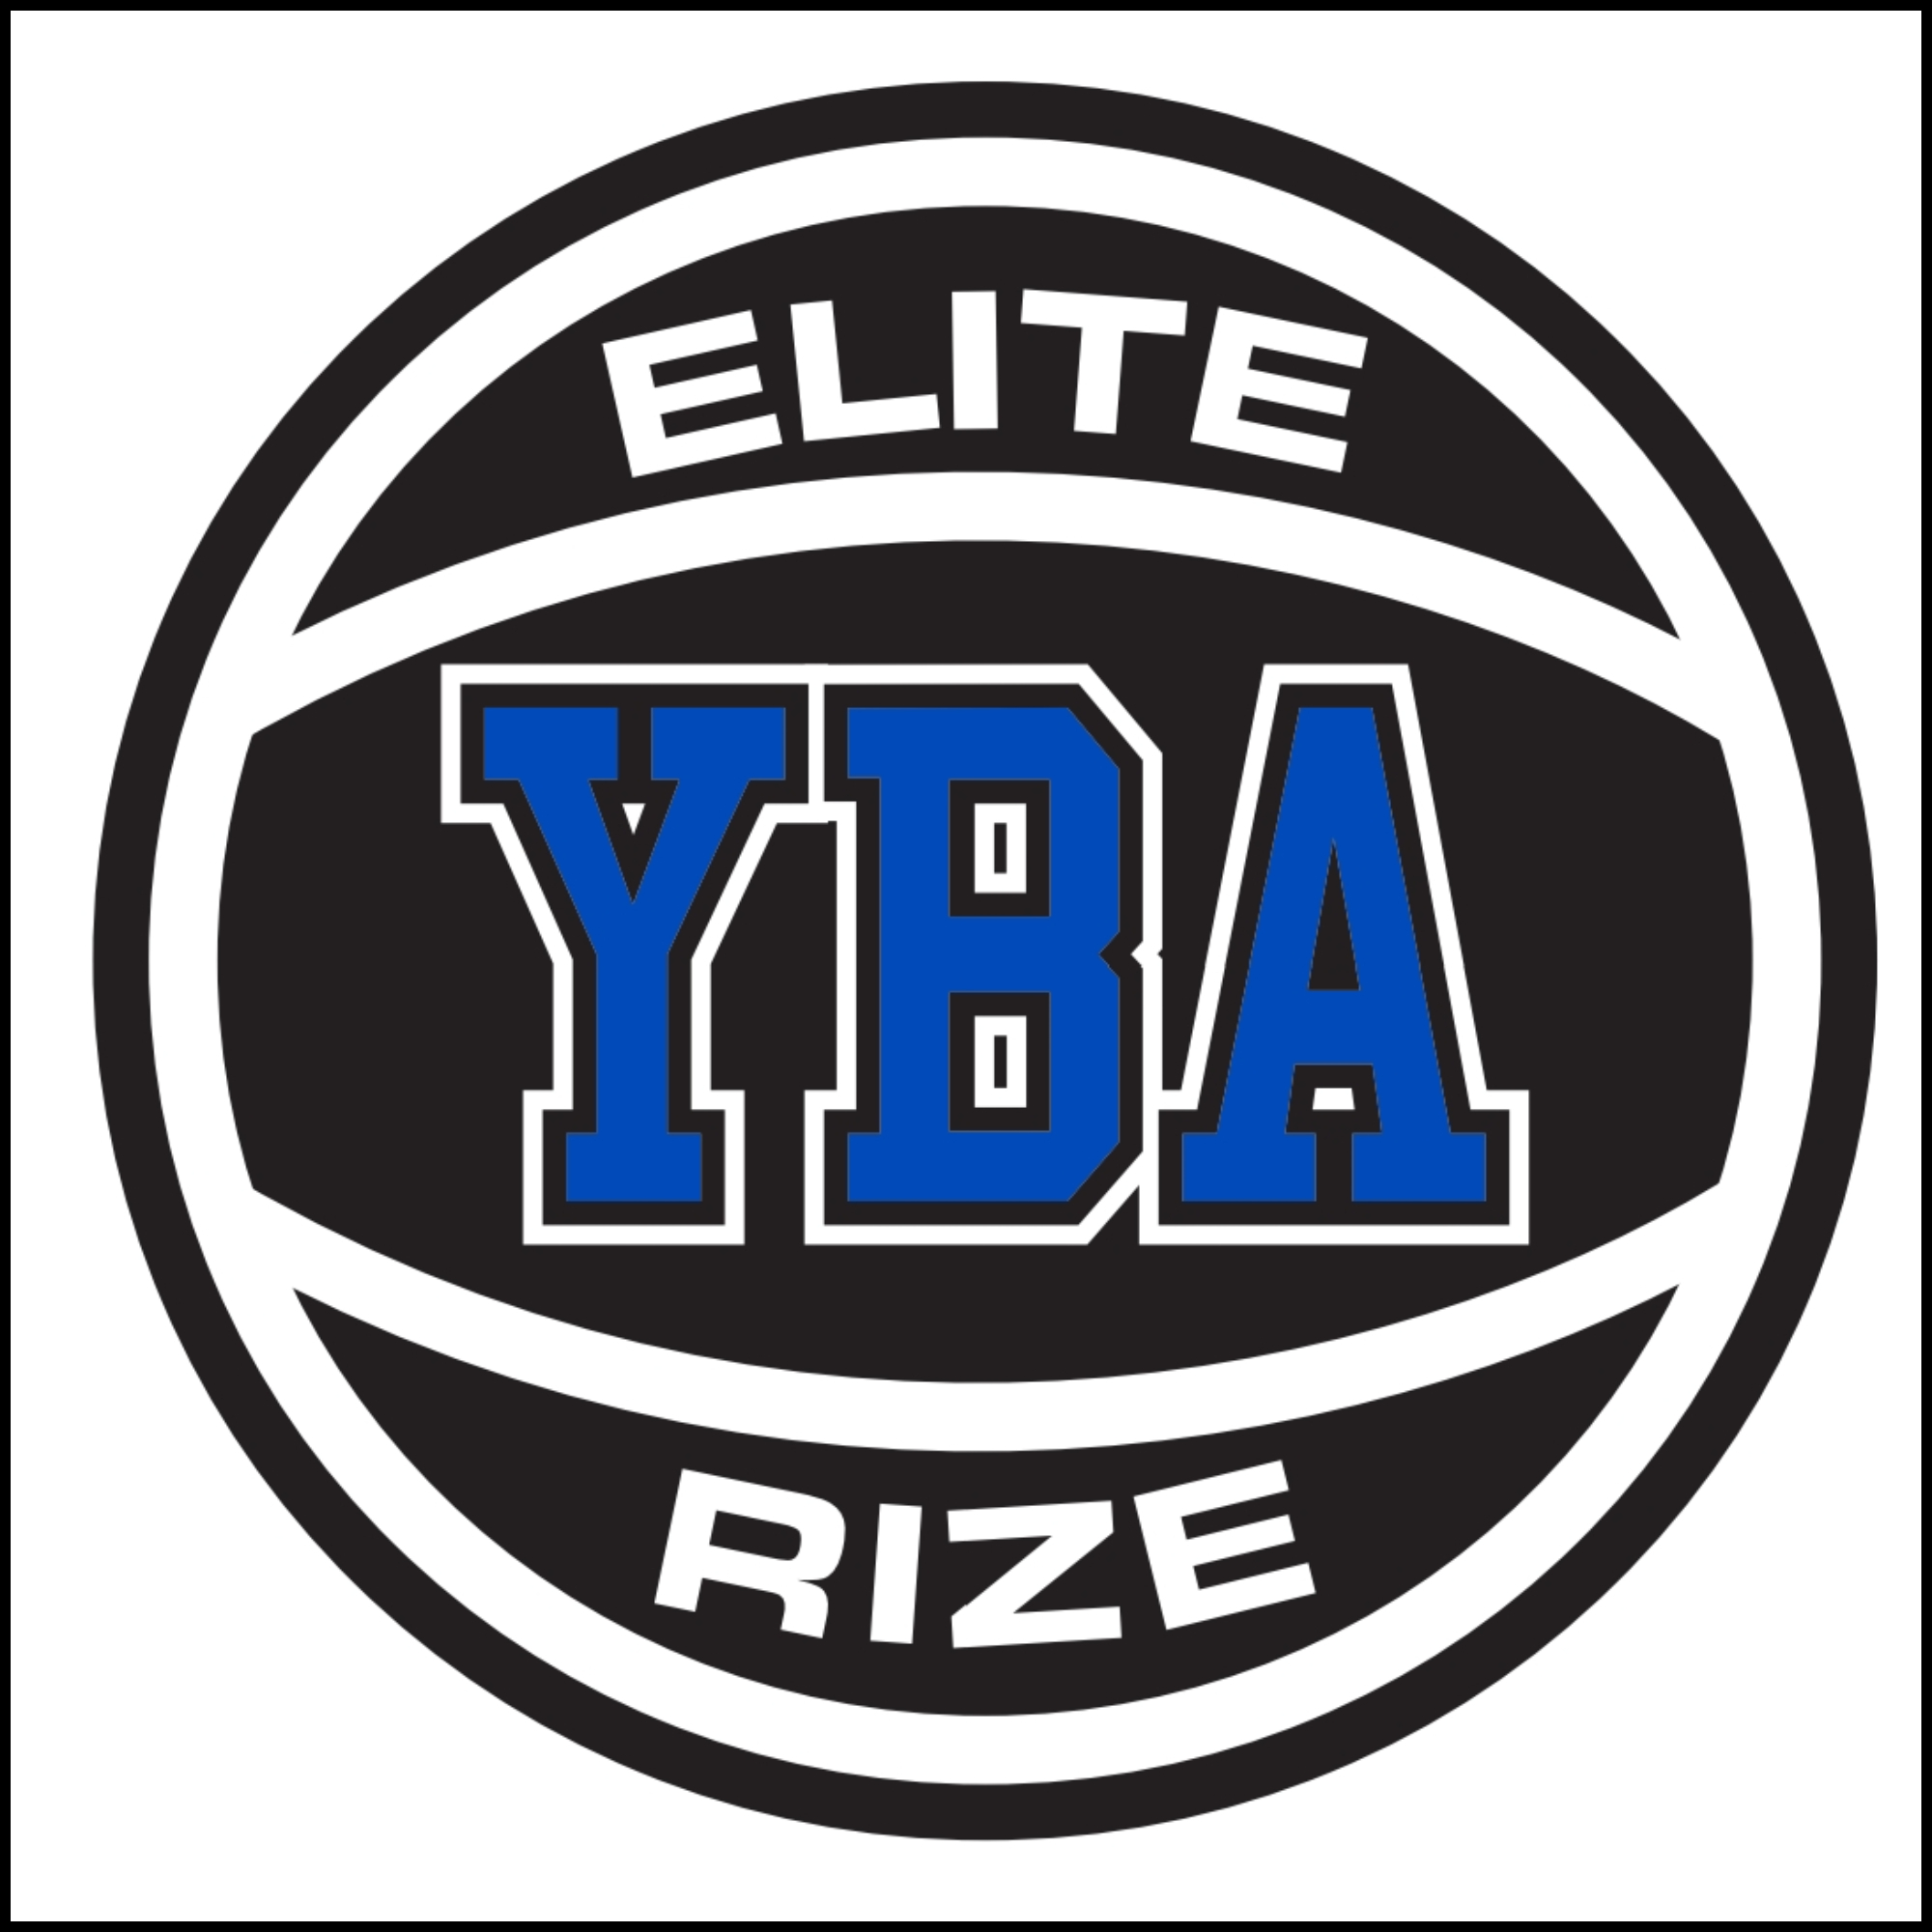 The official logo of Youth Basketball Academy